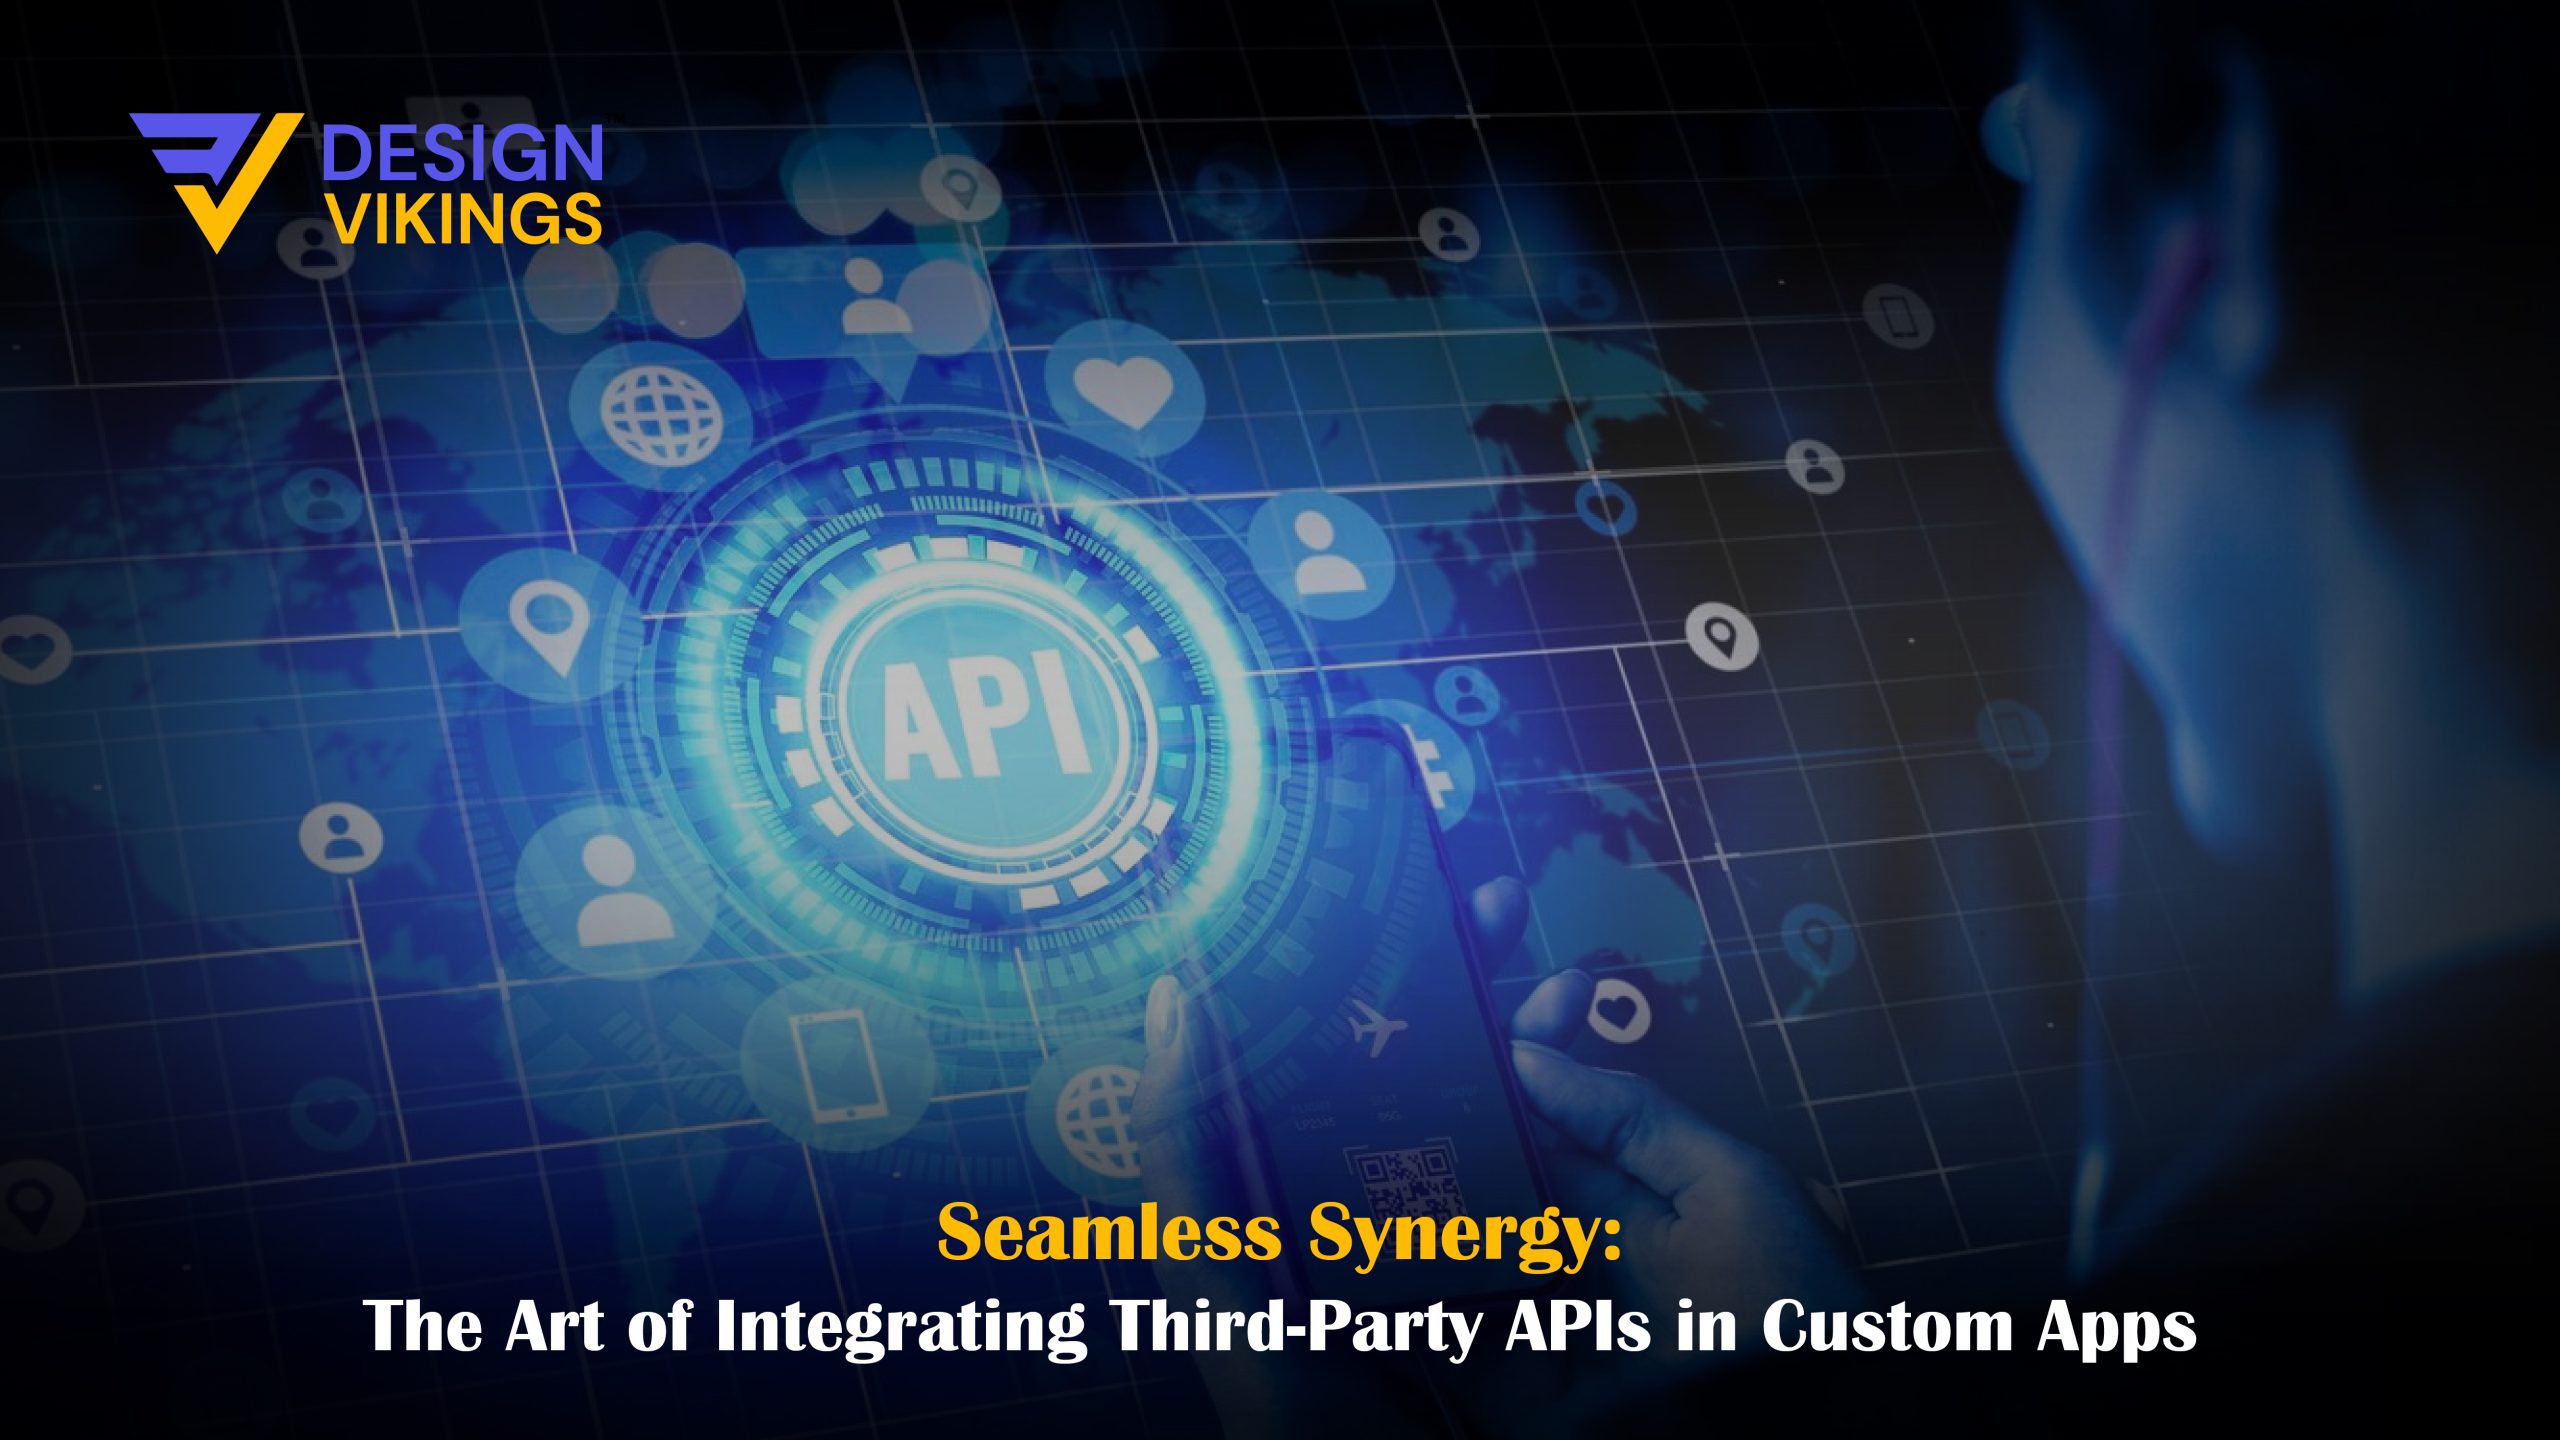 The process and benefits of integrating third-party APIs in custom app design and development services.